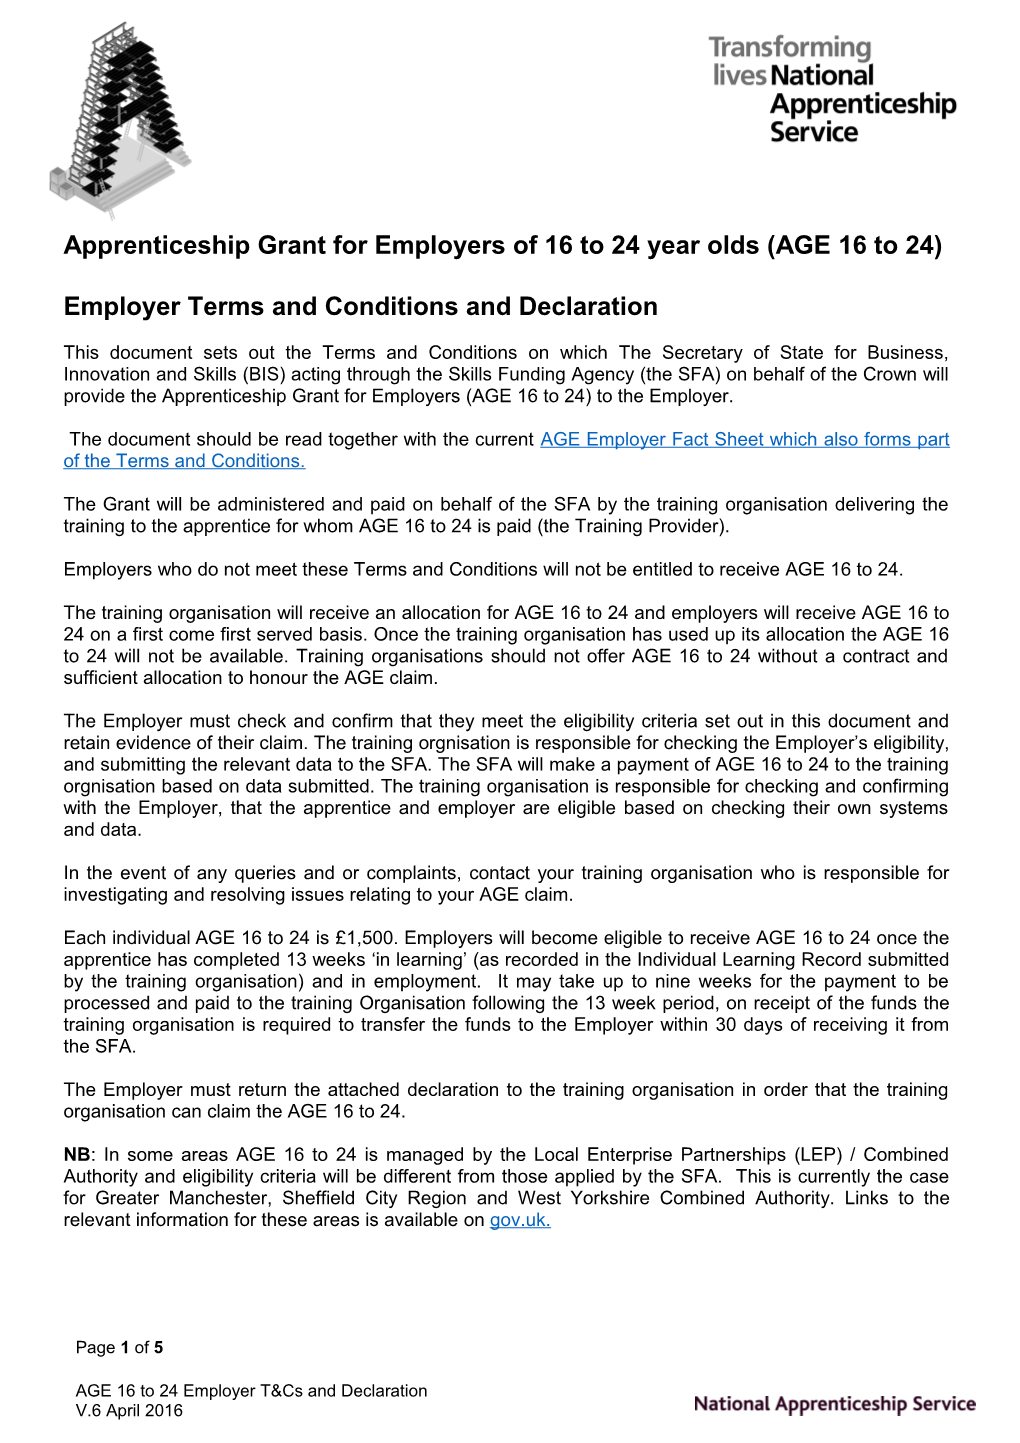 Apprenticeship Grant for Employers of 16 to 24 Year Olds (AGE 16 to 24)